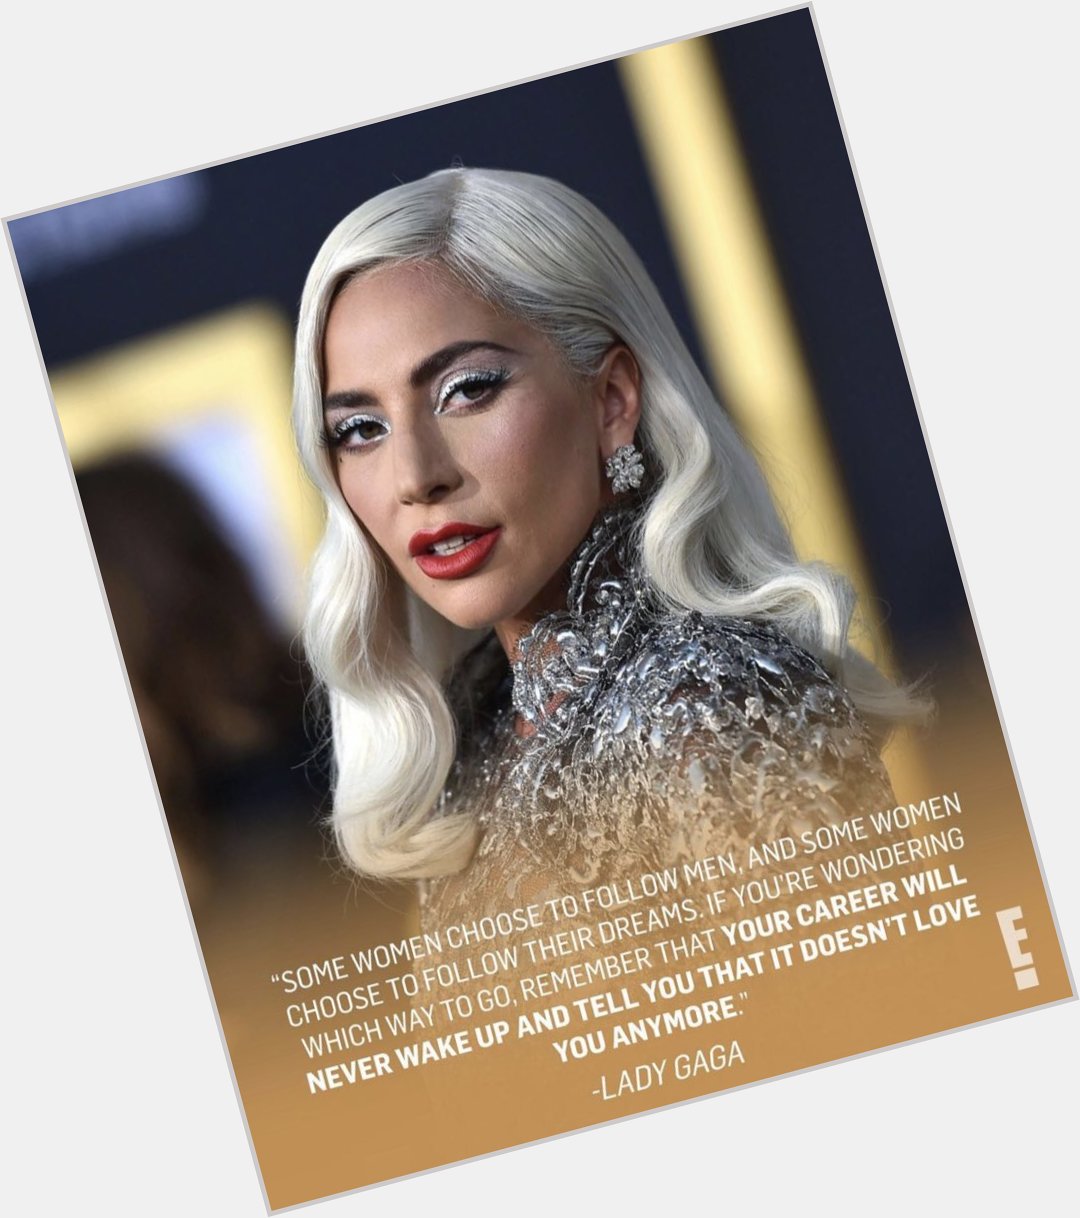 I have carried this quote with me for years! Happy birthday Lady Gaga!  